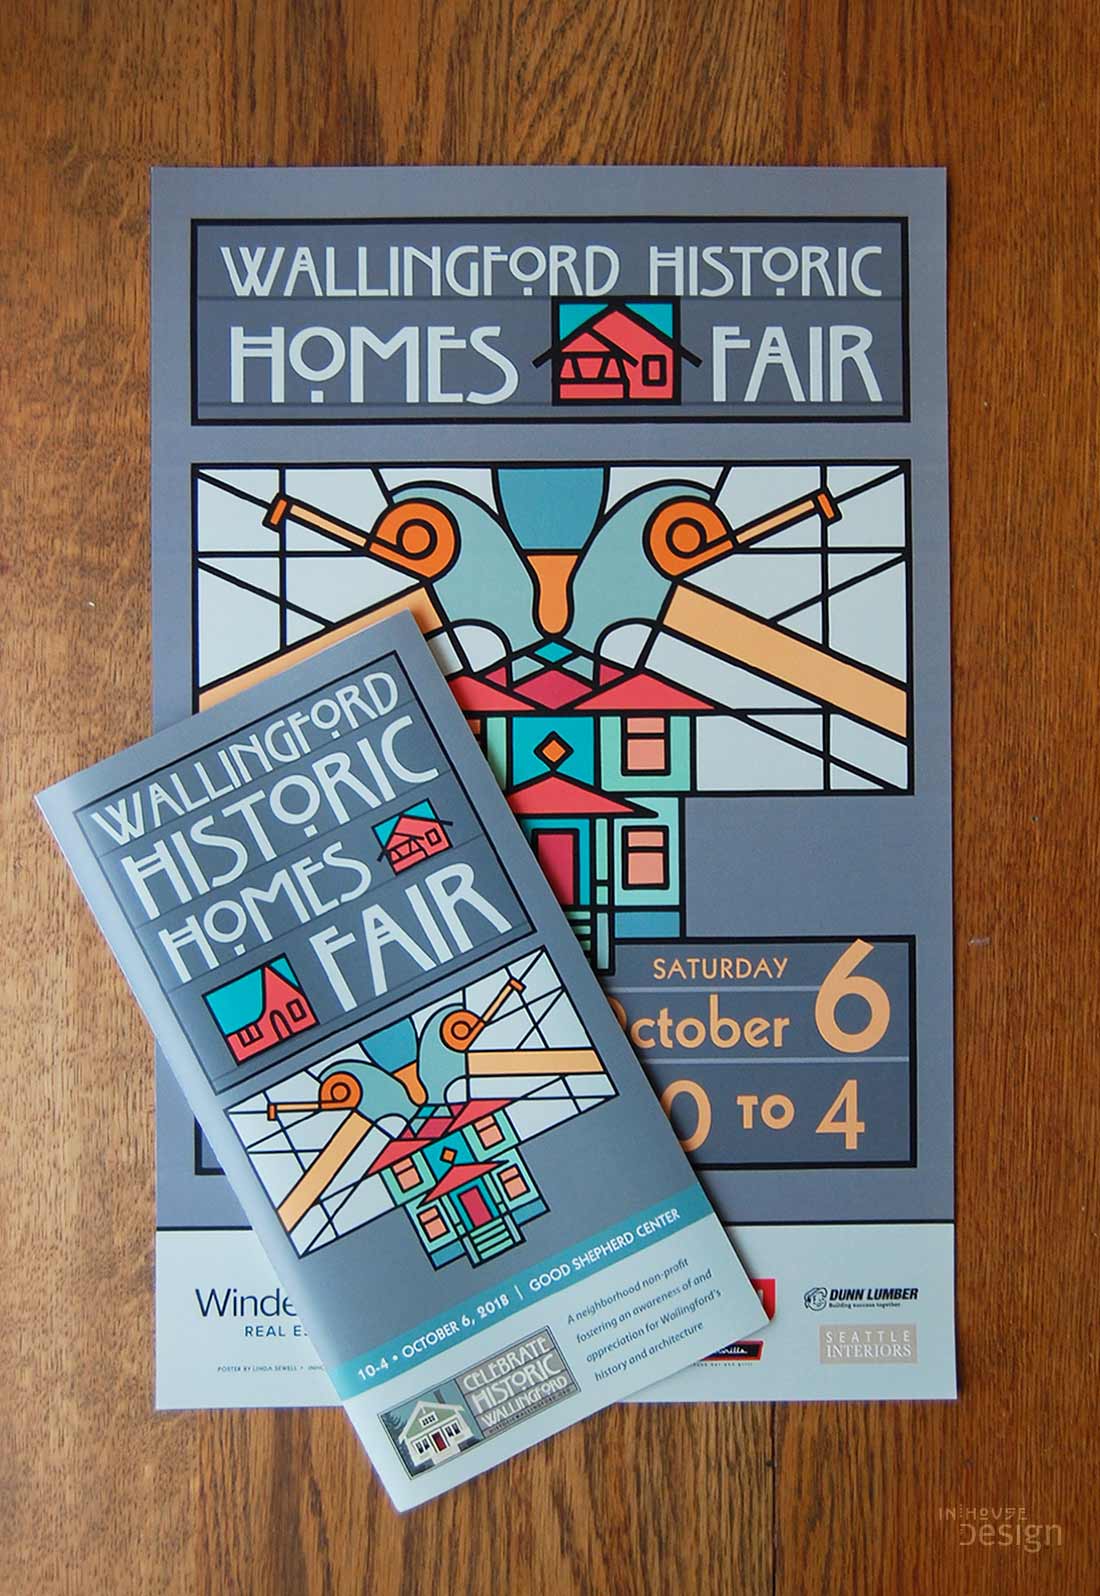 2019 Historic Homes Fair poster and program